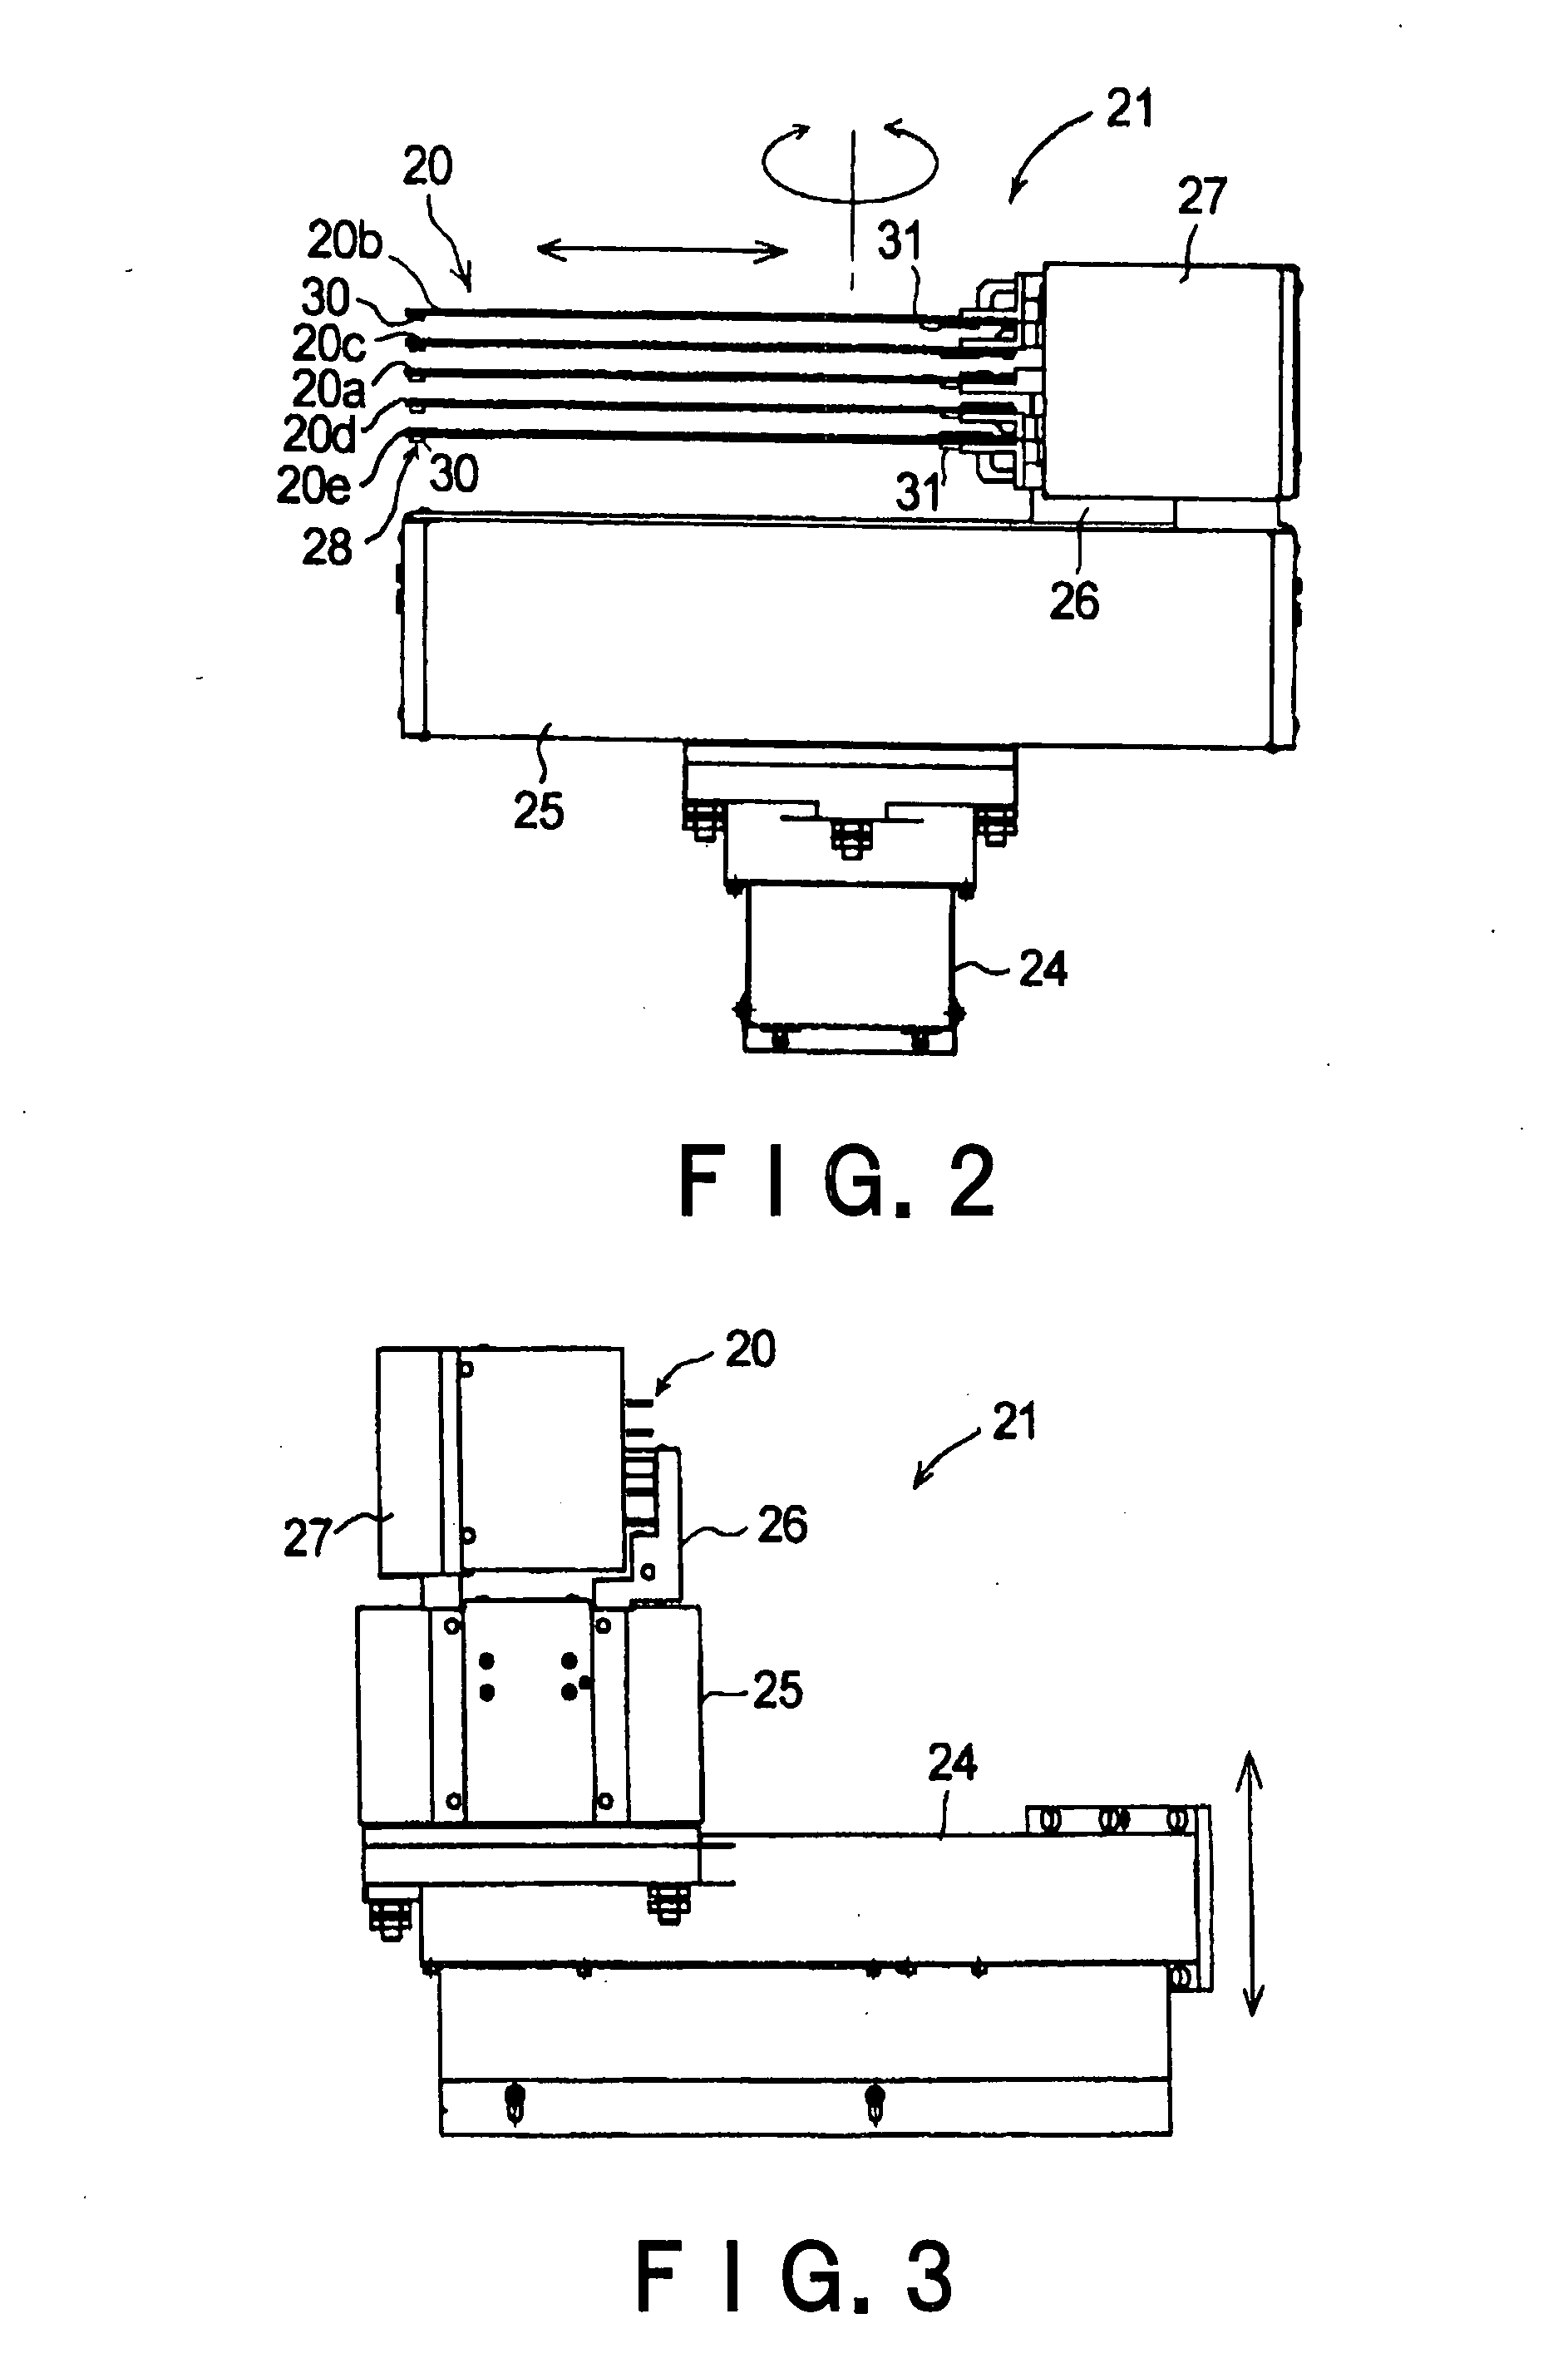 Vertical Heat Treatment System and Automatic Teaching Method for Transfer Mechanism